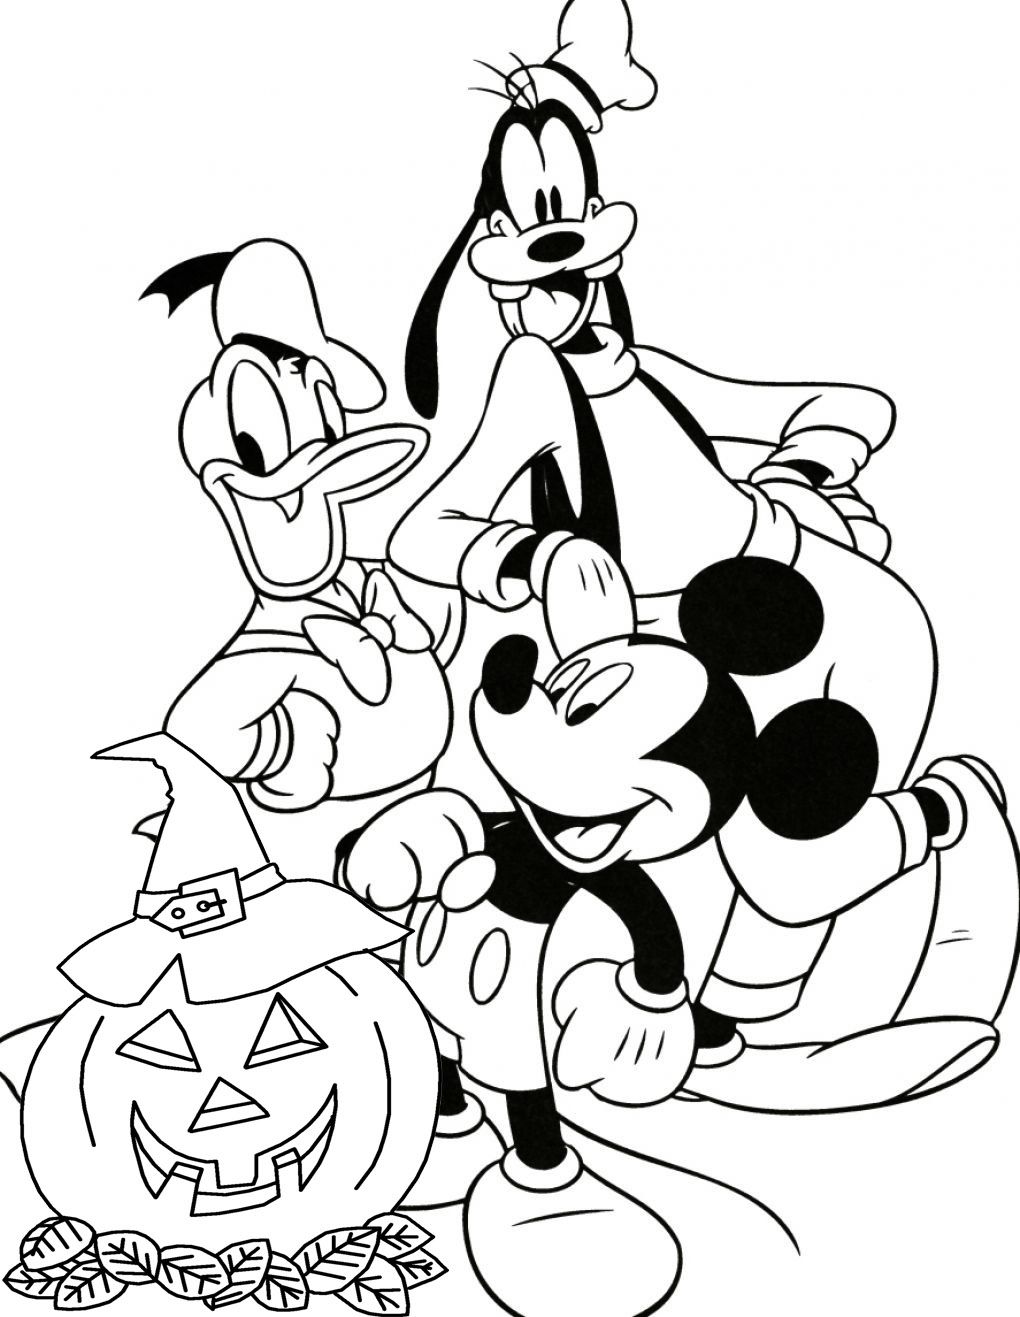 Pin by Bethany Kolomaznik on Kids Halloween Ideas | Mickey mouse coloring  pages, Halloween coloring sheets, Disney princess coloring pages